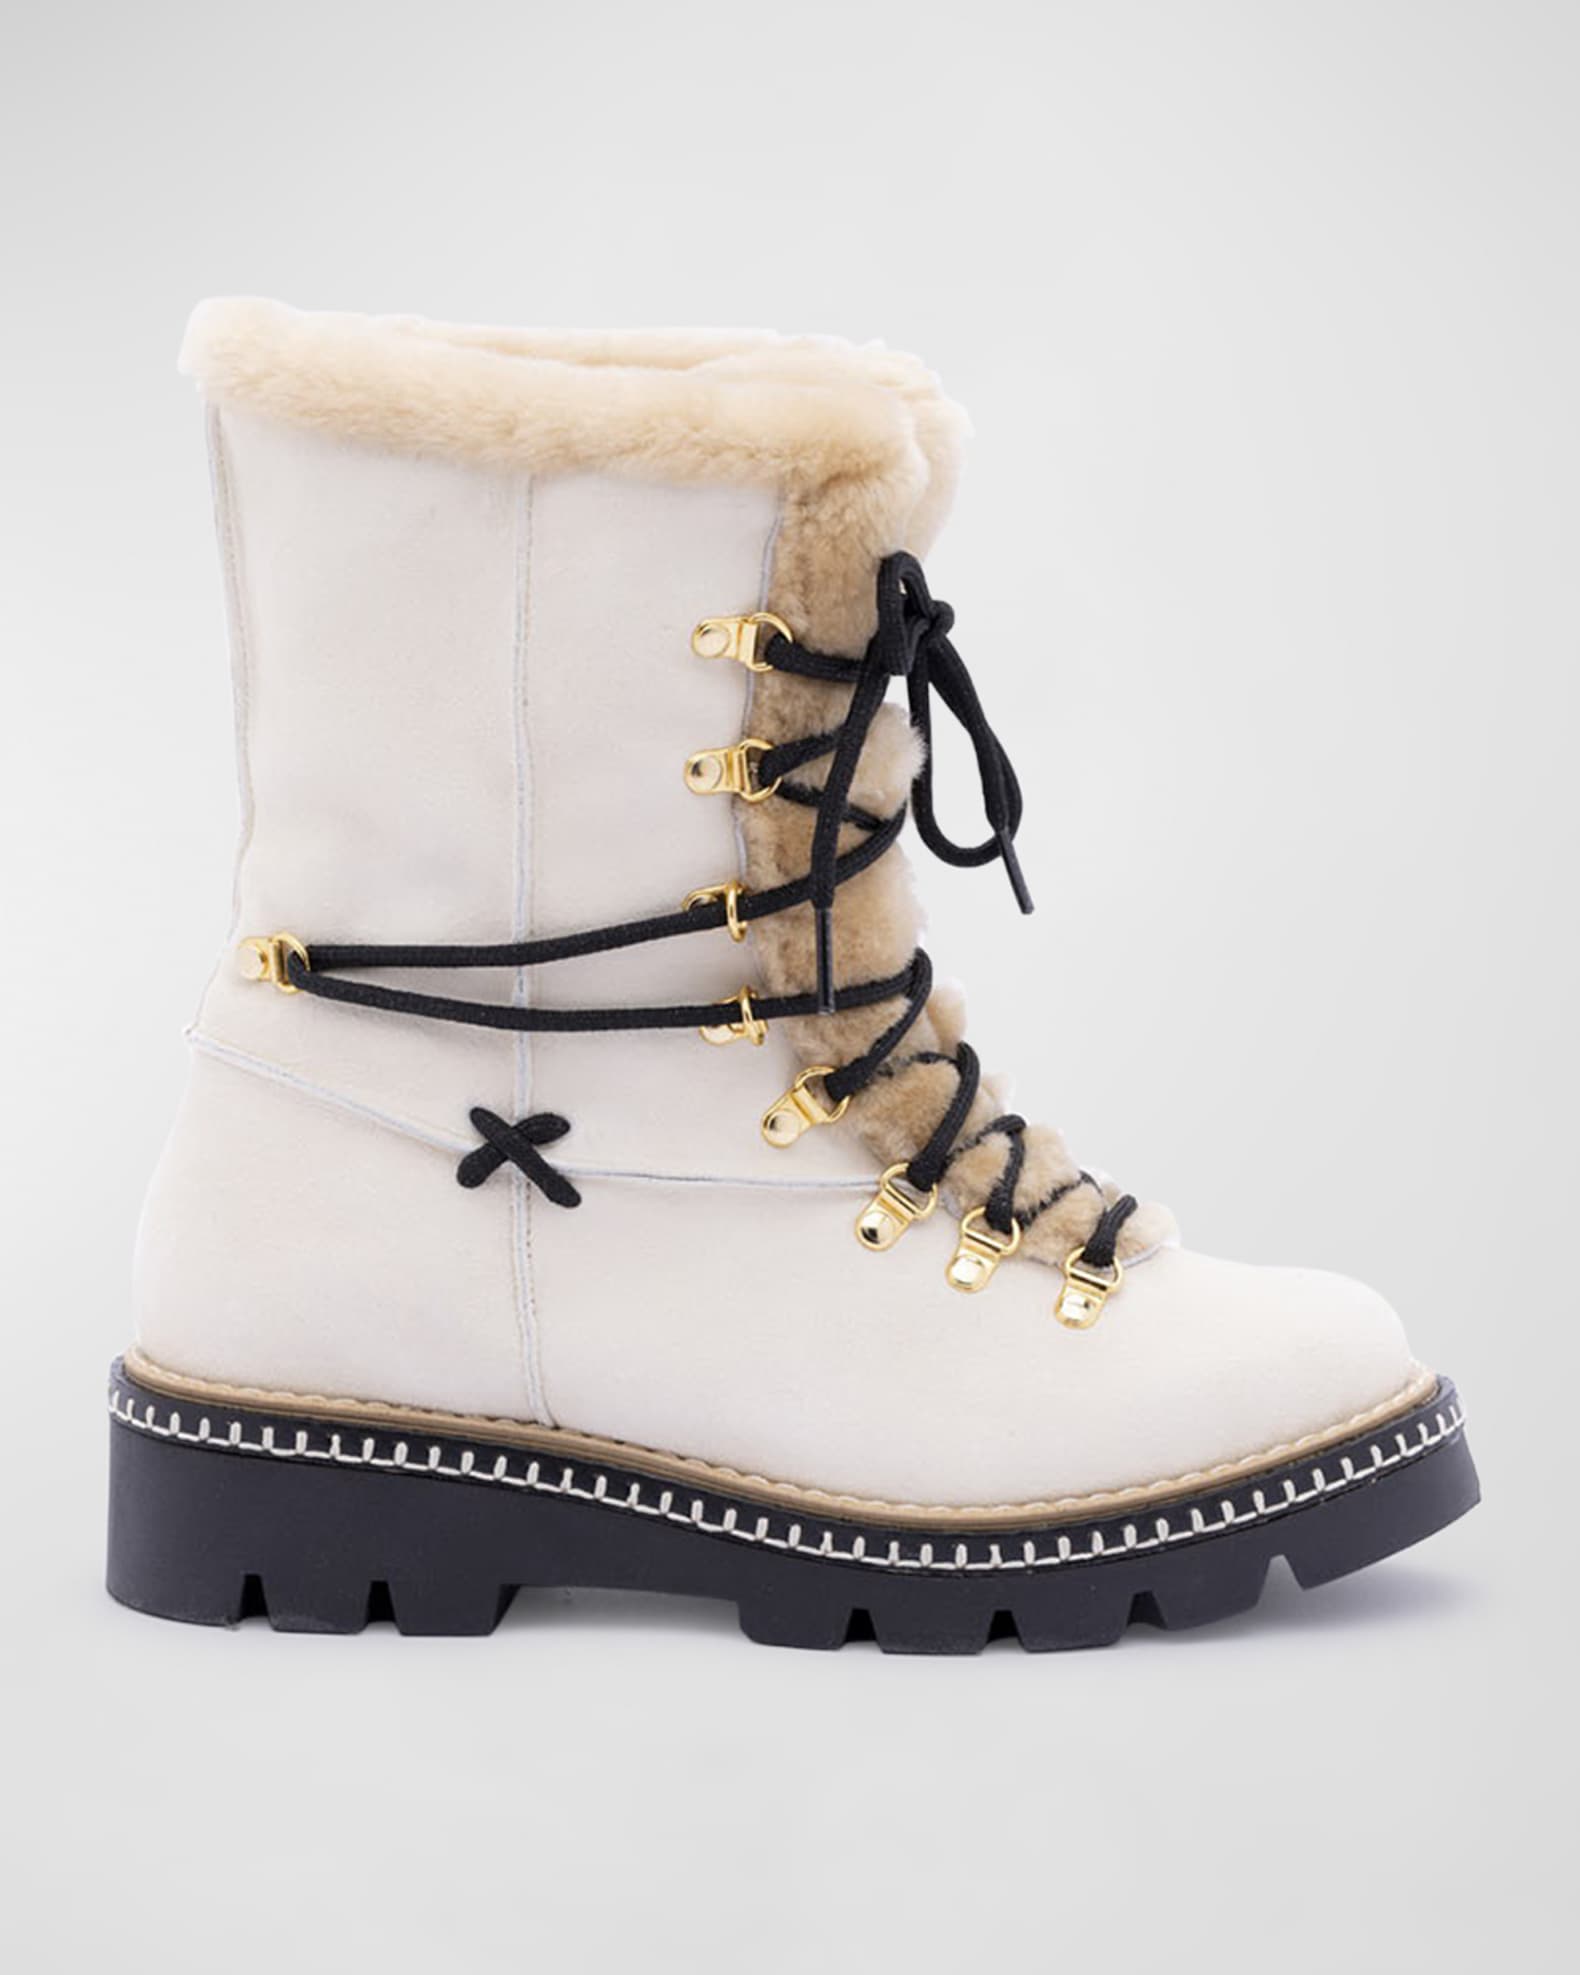 Montelliana 1965 Shearling-Lined Leather Hiking Boots | Neiman Marcus